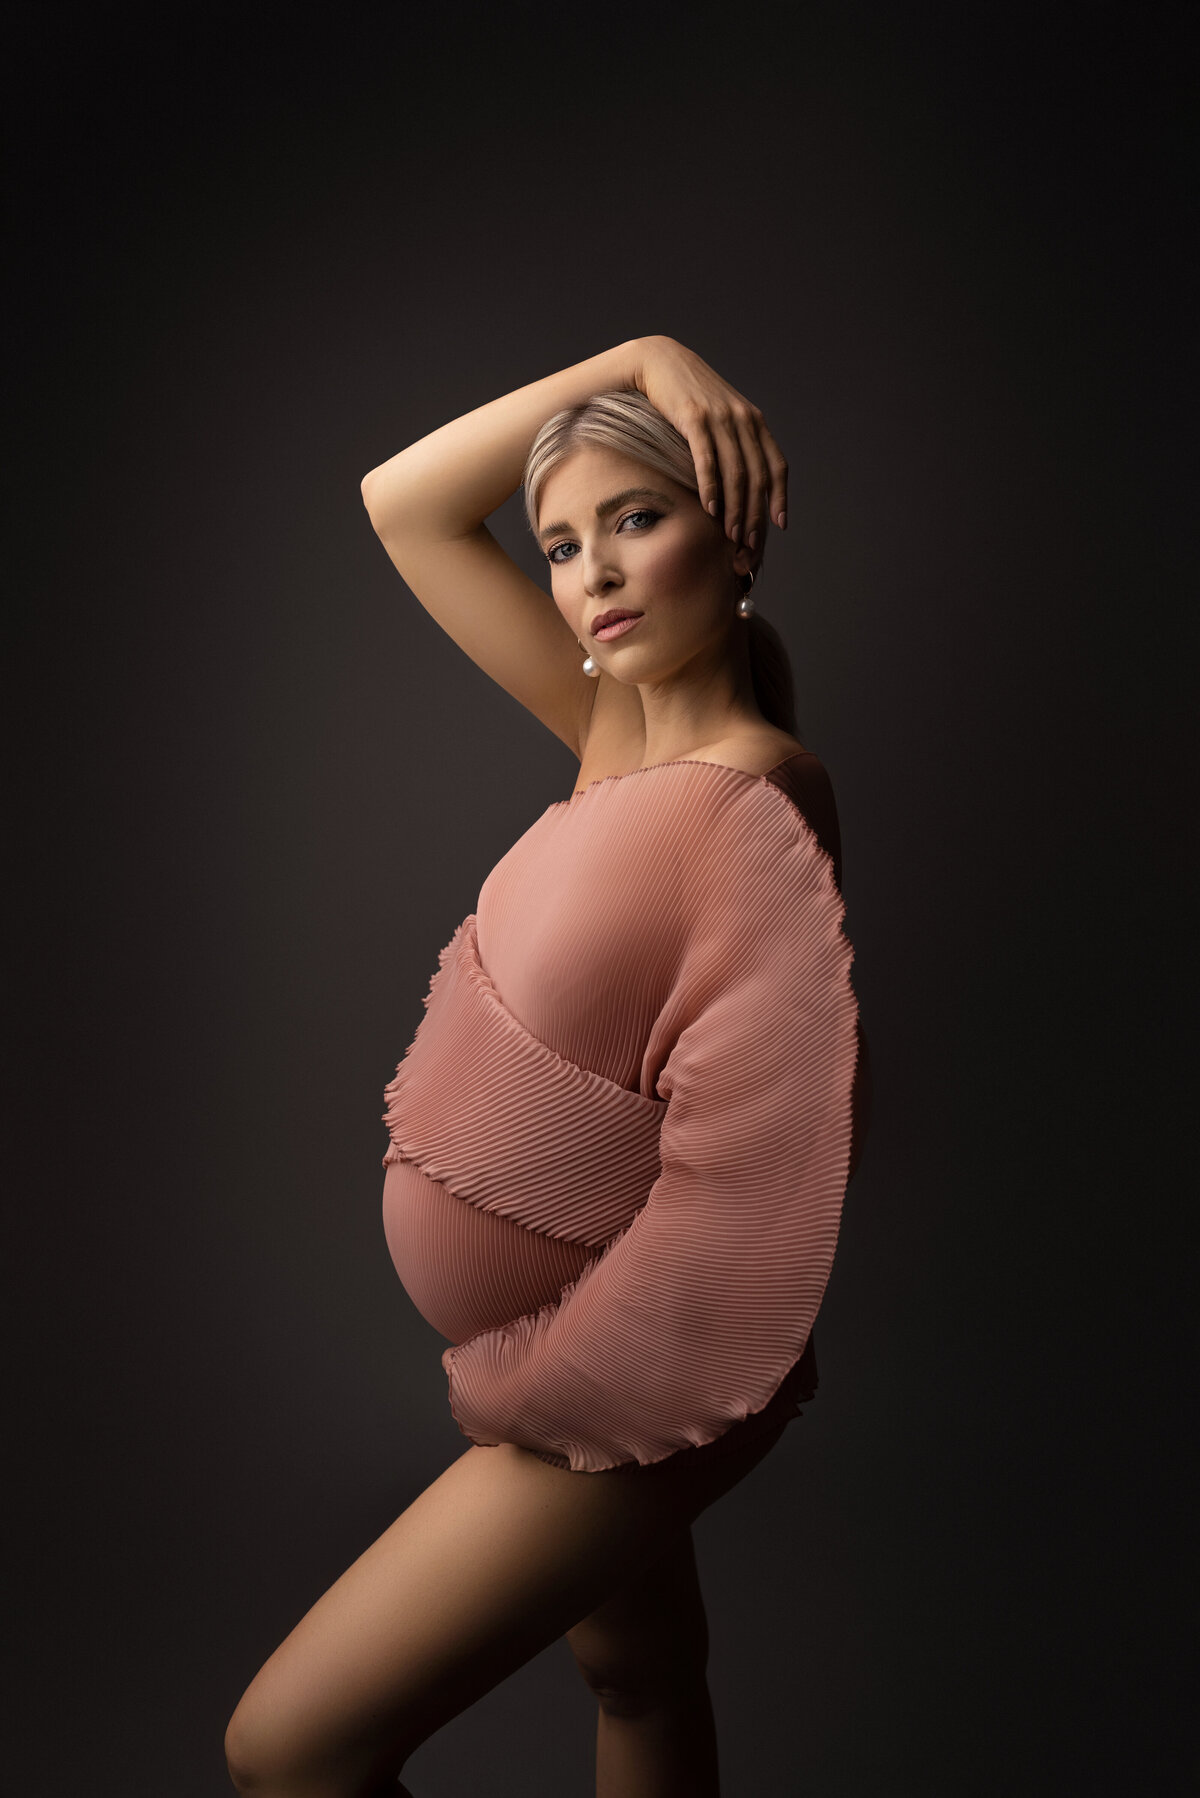 Woman poses for a fine art maternity photoshoot with Philadelphia's best maternity photographer Katie Marshall. She is standing side profile to the camera with her foreleg bent. Her forearm is underneath her baby bump, her back hand is resting gently atop of her head. She is looking over to ward the camera with a serious expression.